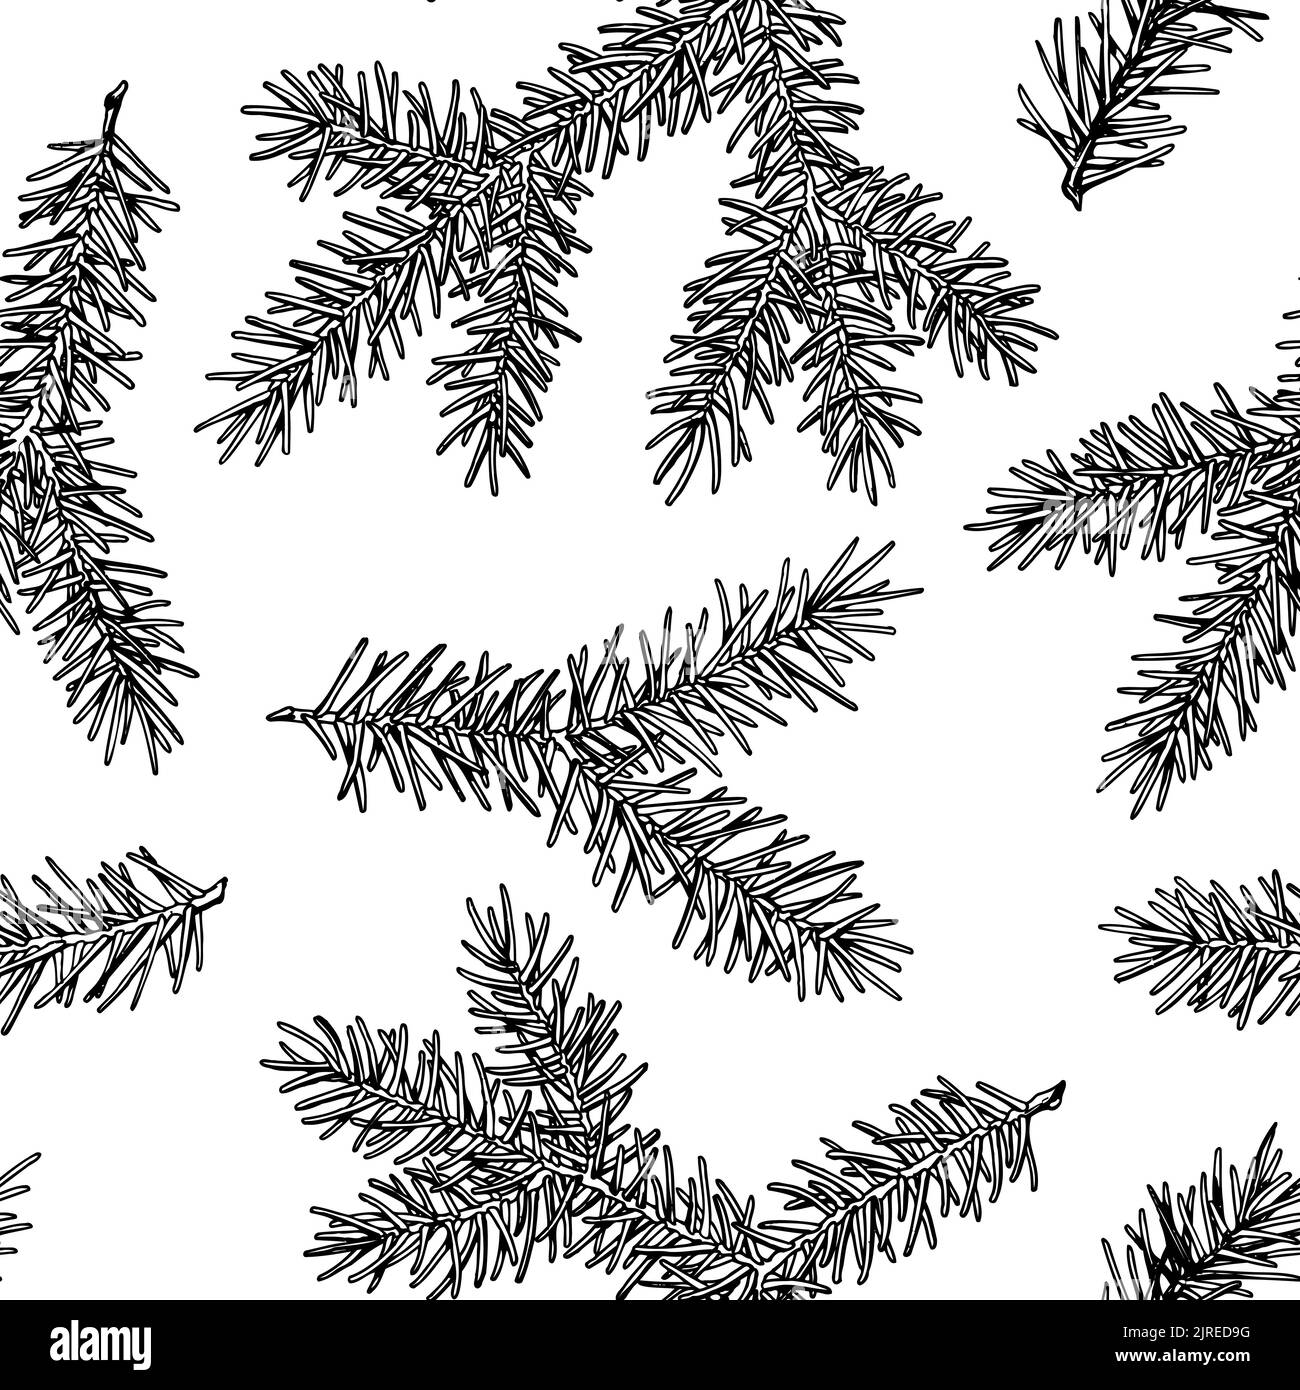 Mysterious forest seamless pattern background design. Engraved style. Hand drawn spruce branch. Stock Vector